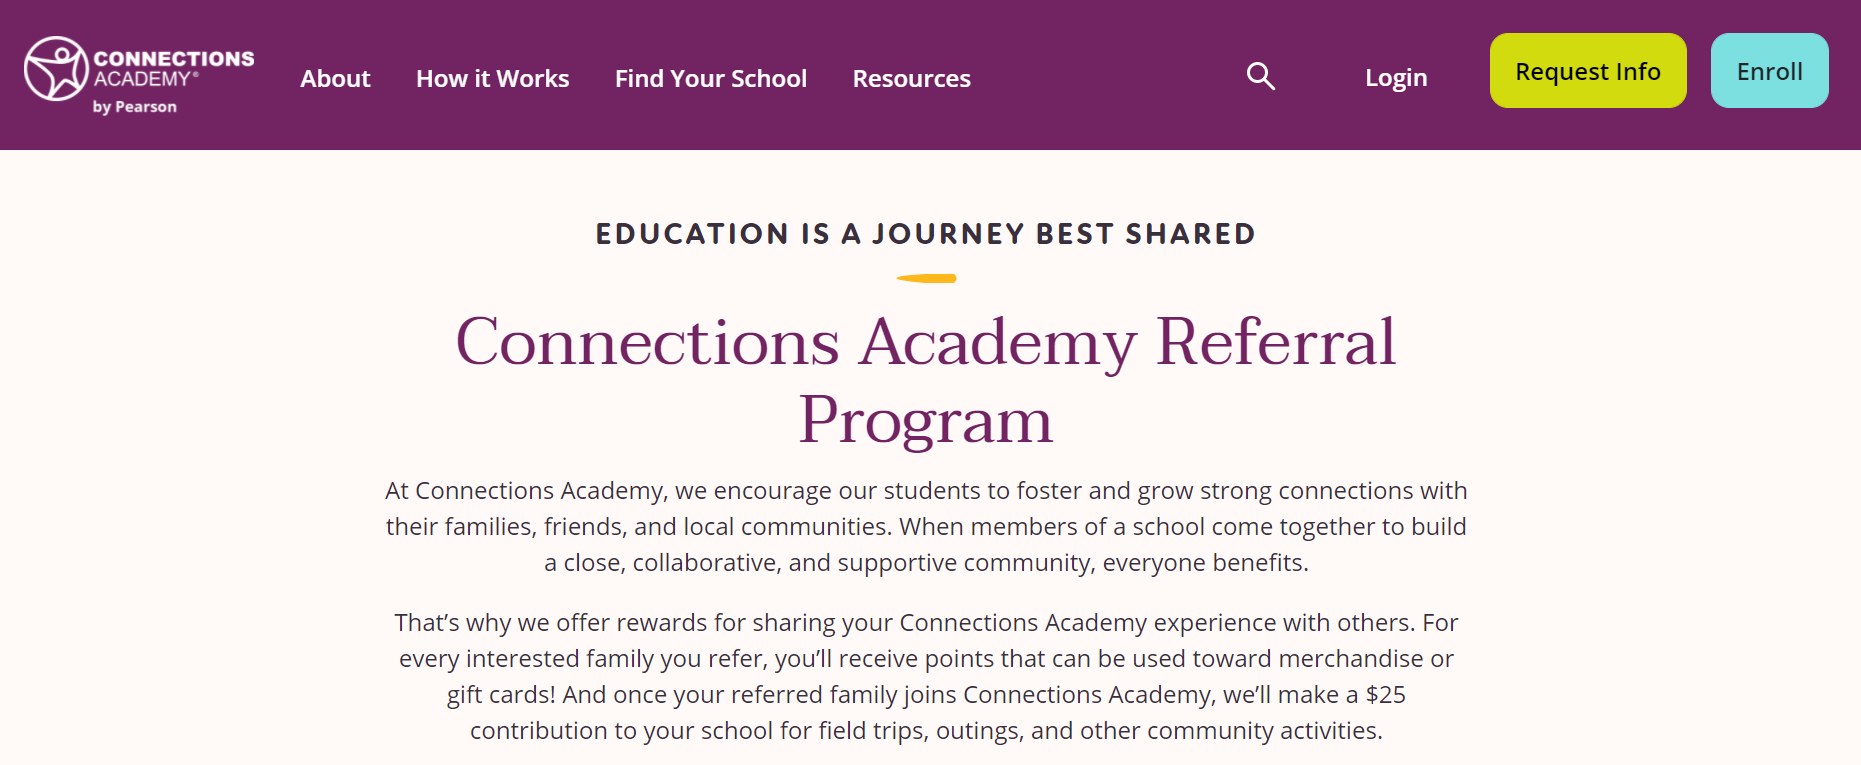 Connections Academy Referral Program